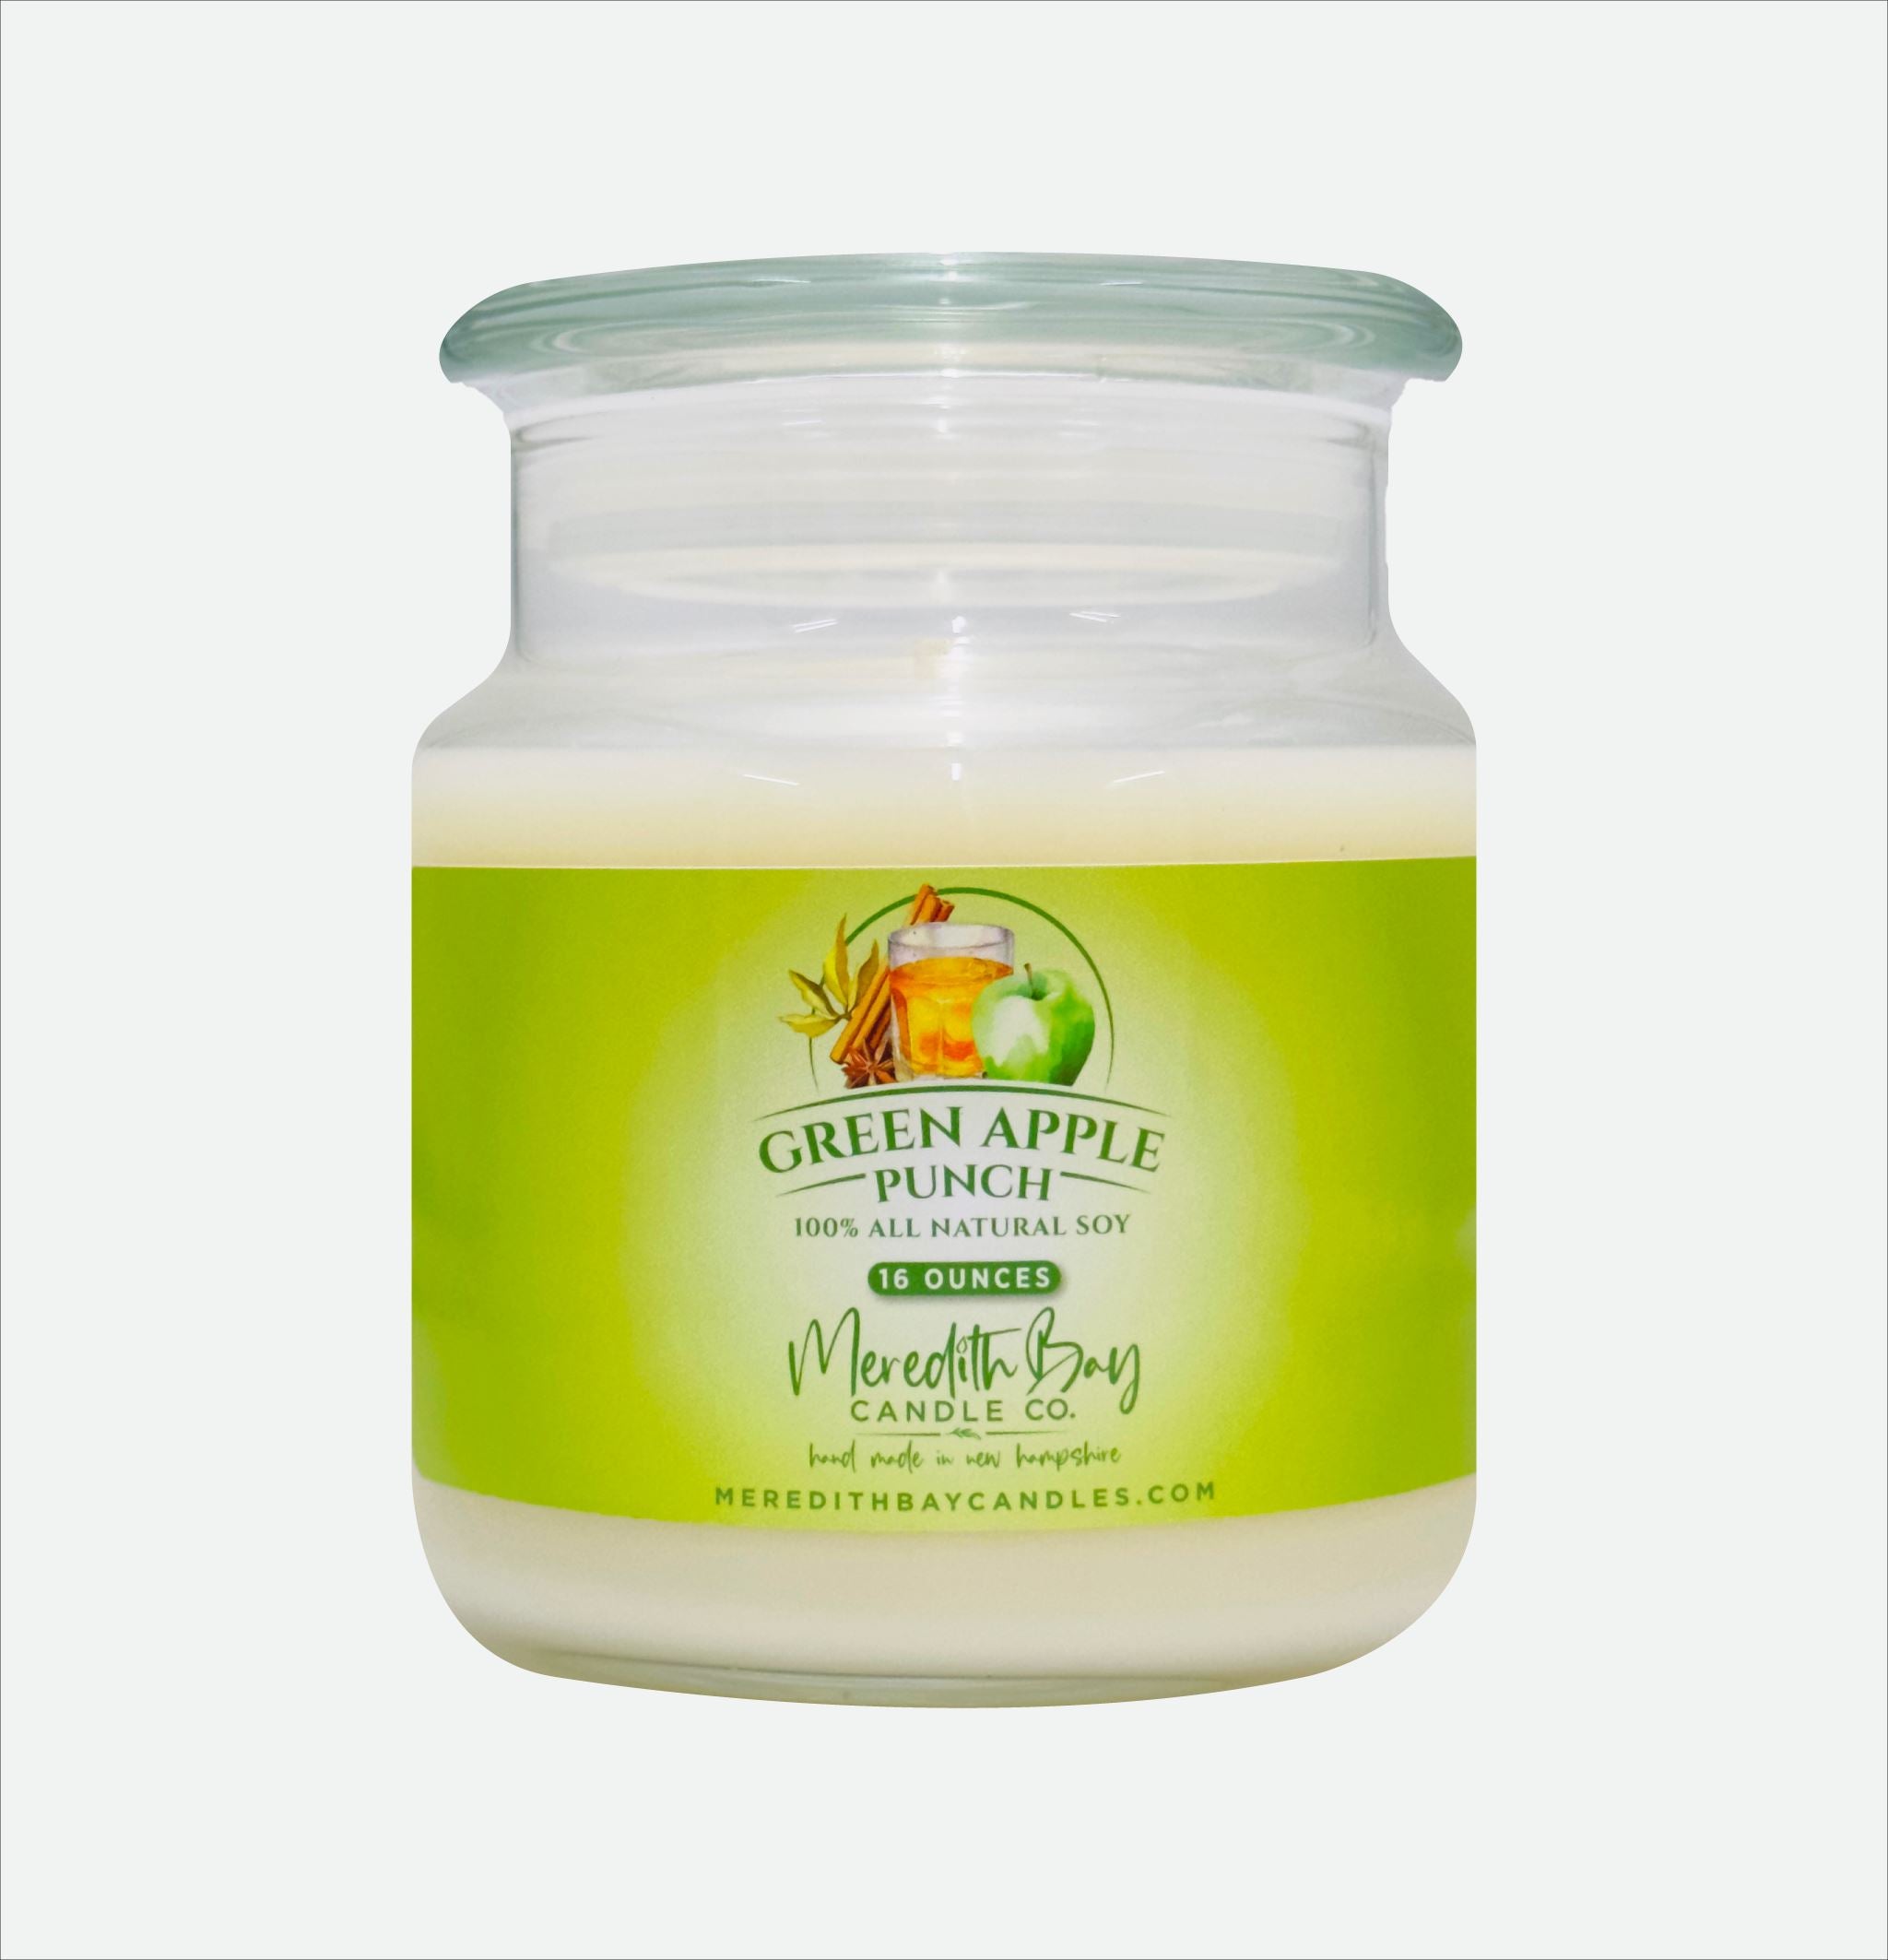 Green Apple Punch Soy Candle Meredith Bay Candle Co 16 Oz 